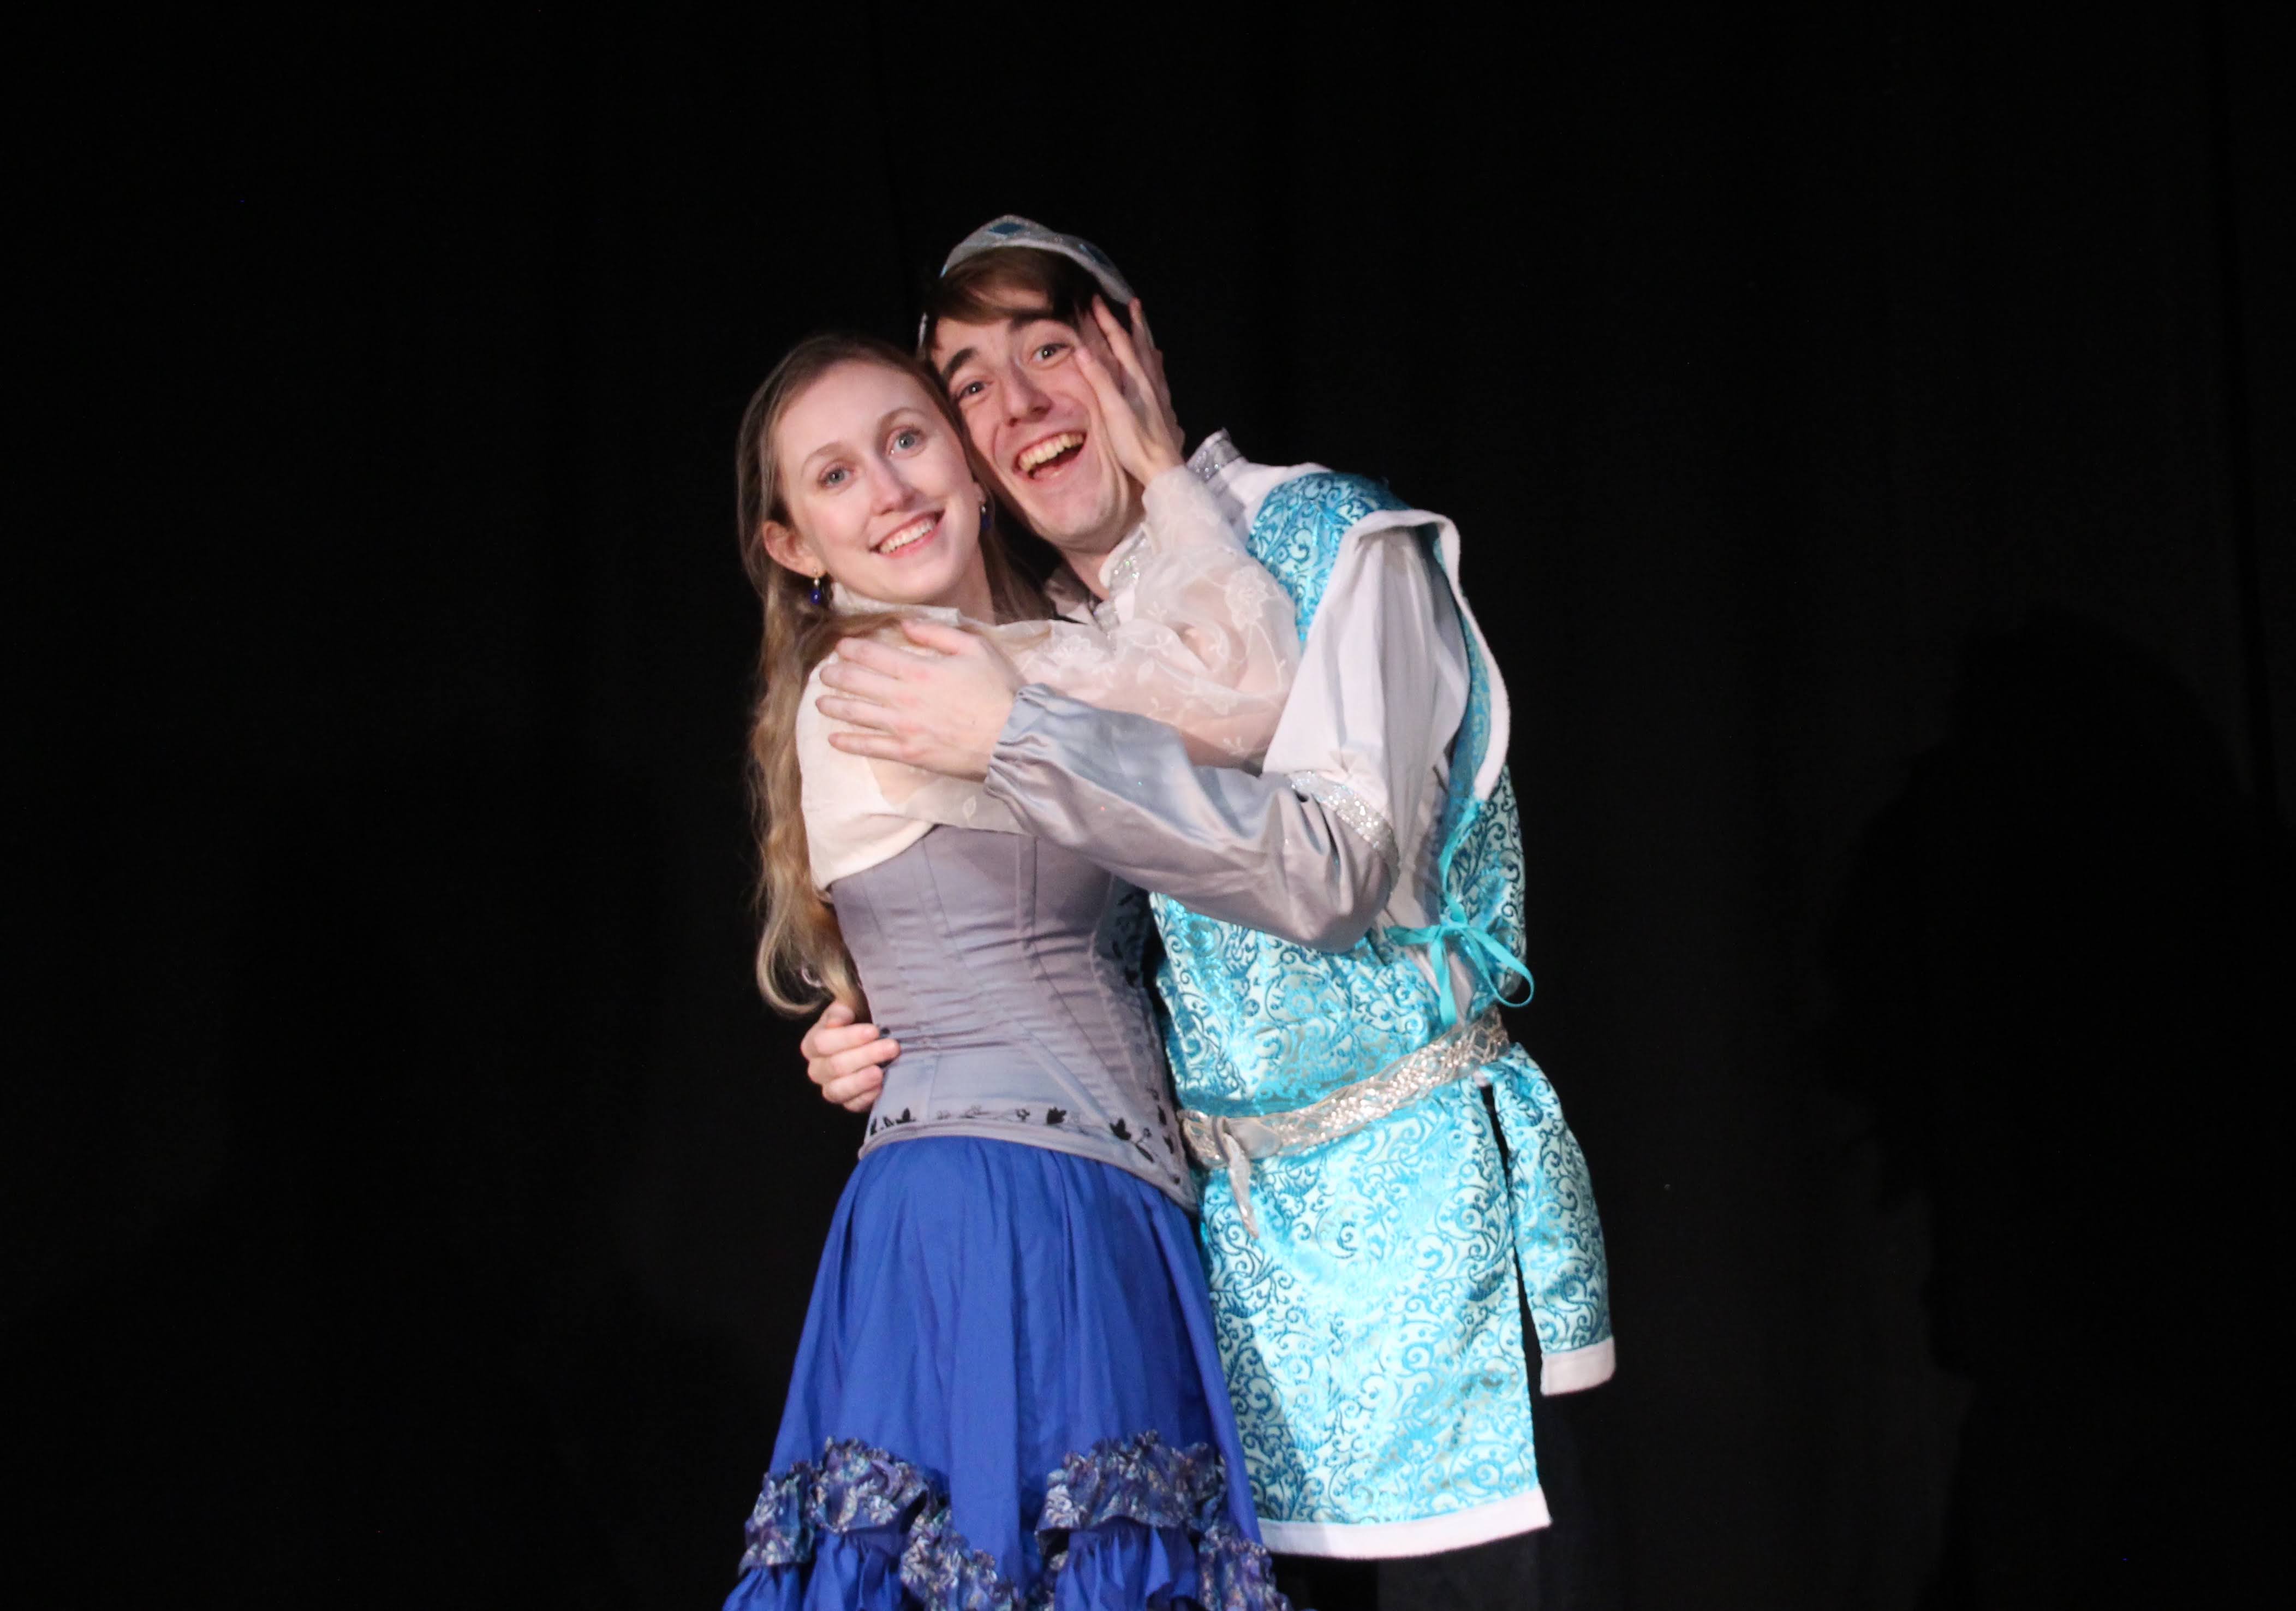 (Left to Right) Merry (Played by Sarina Resnick) and Prince Melvin(Played by Michael Wadsworth). Photo by Eric Dubois